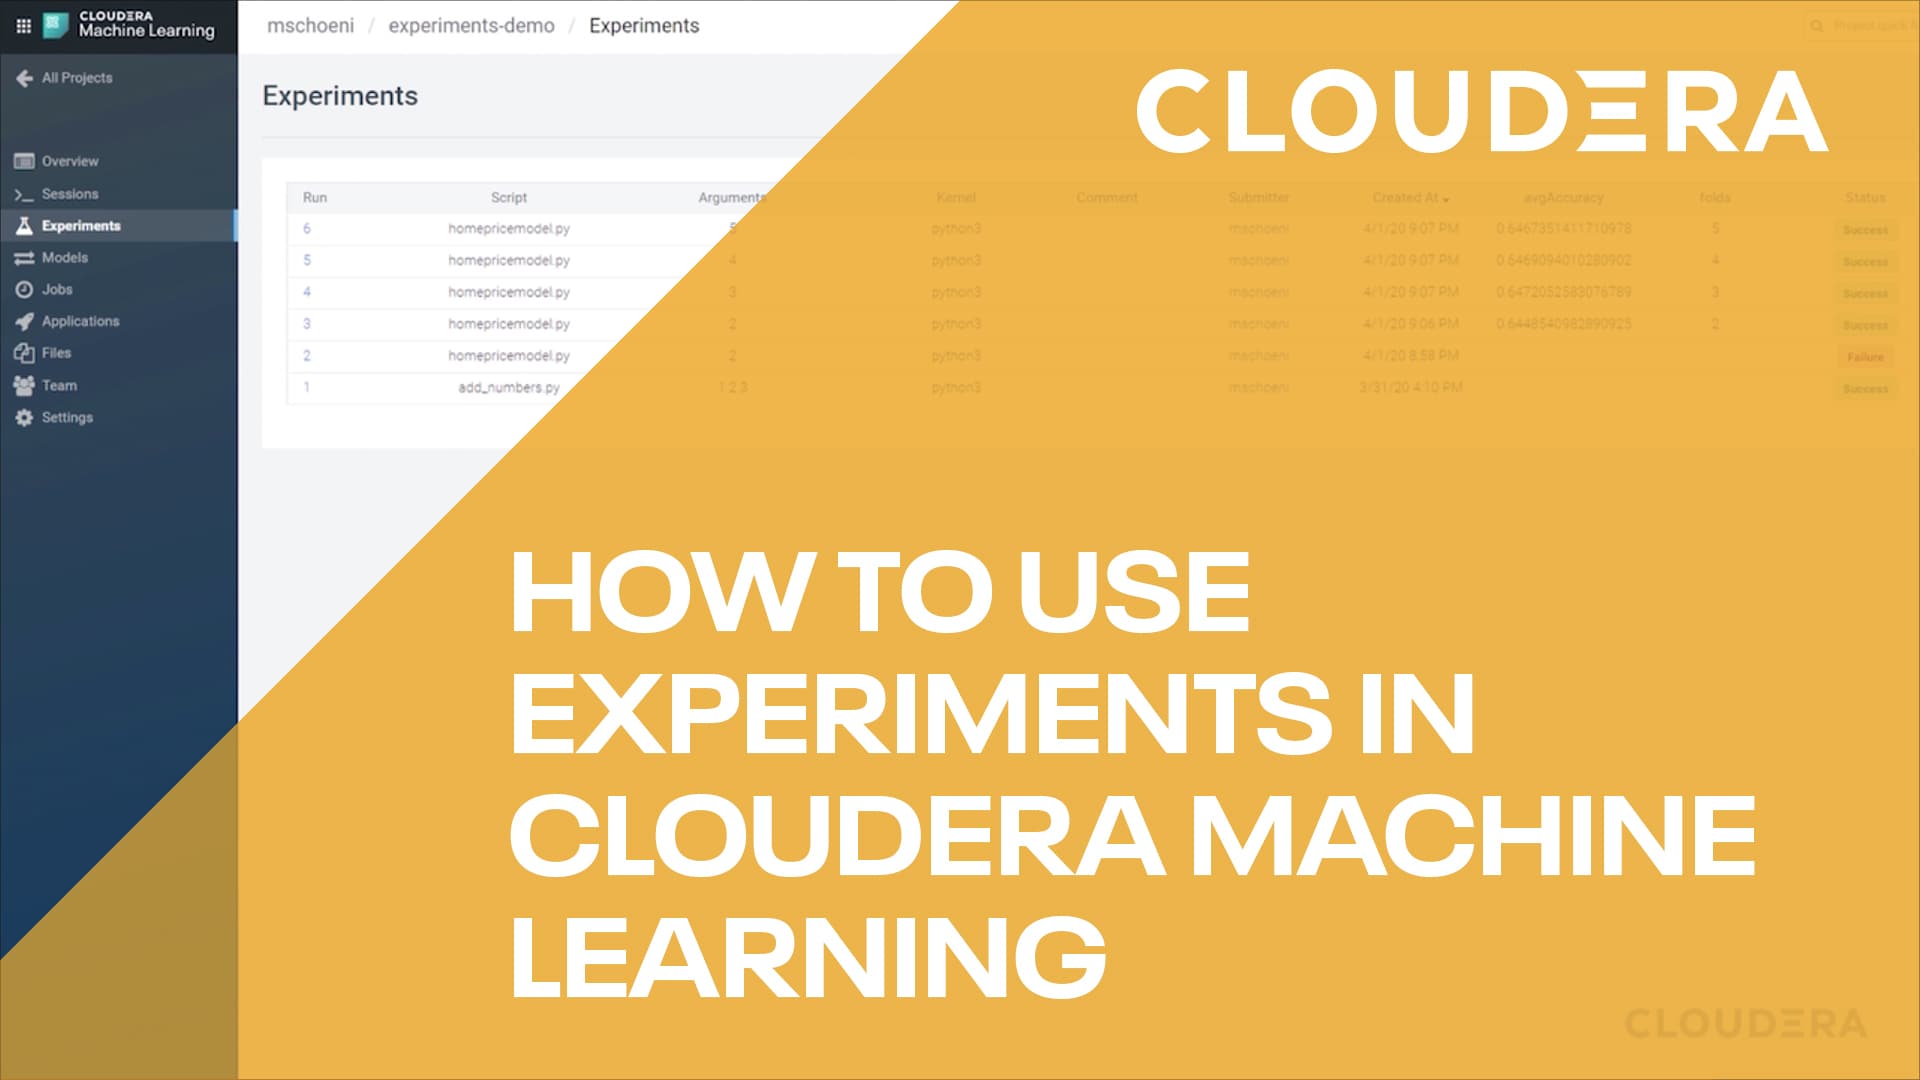 How to use experiments in Cloudera Machine Learning video